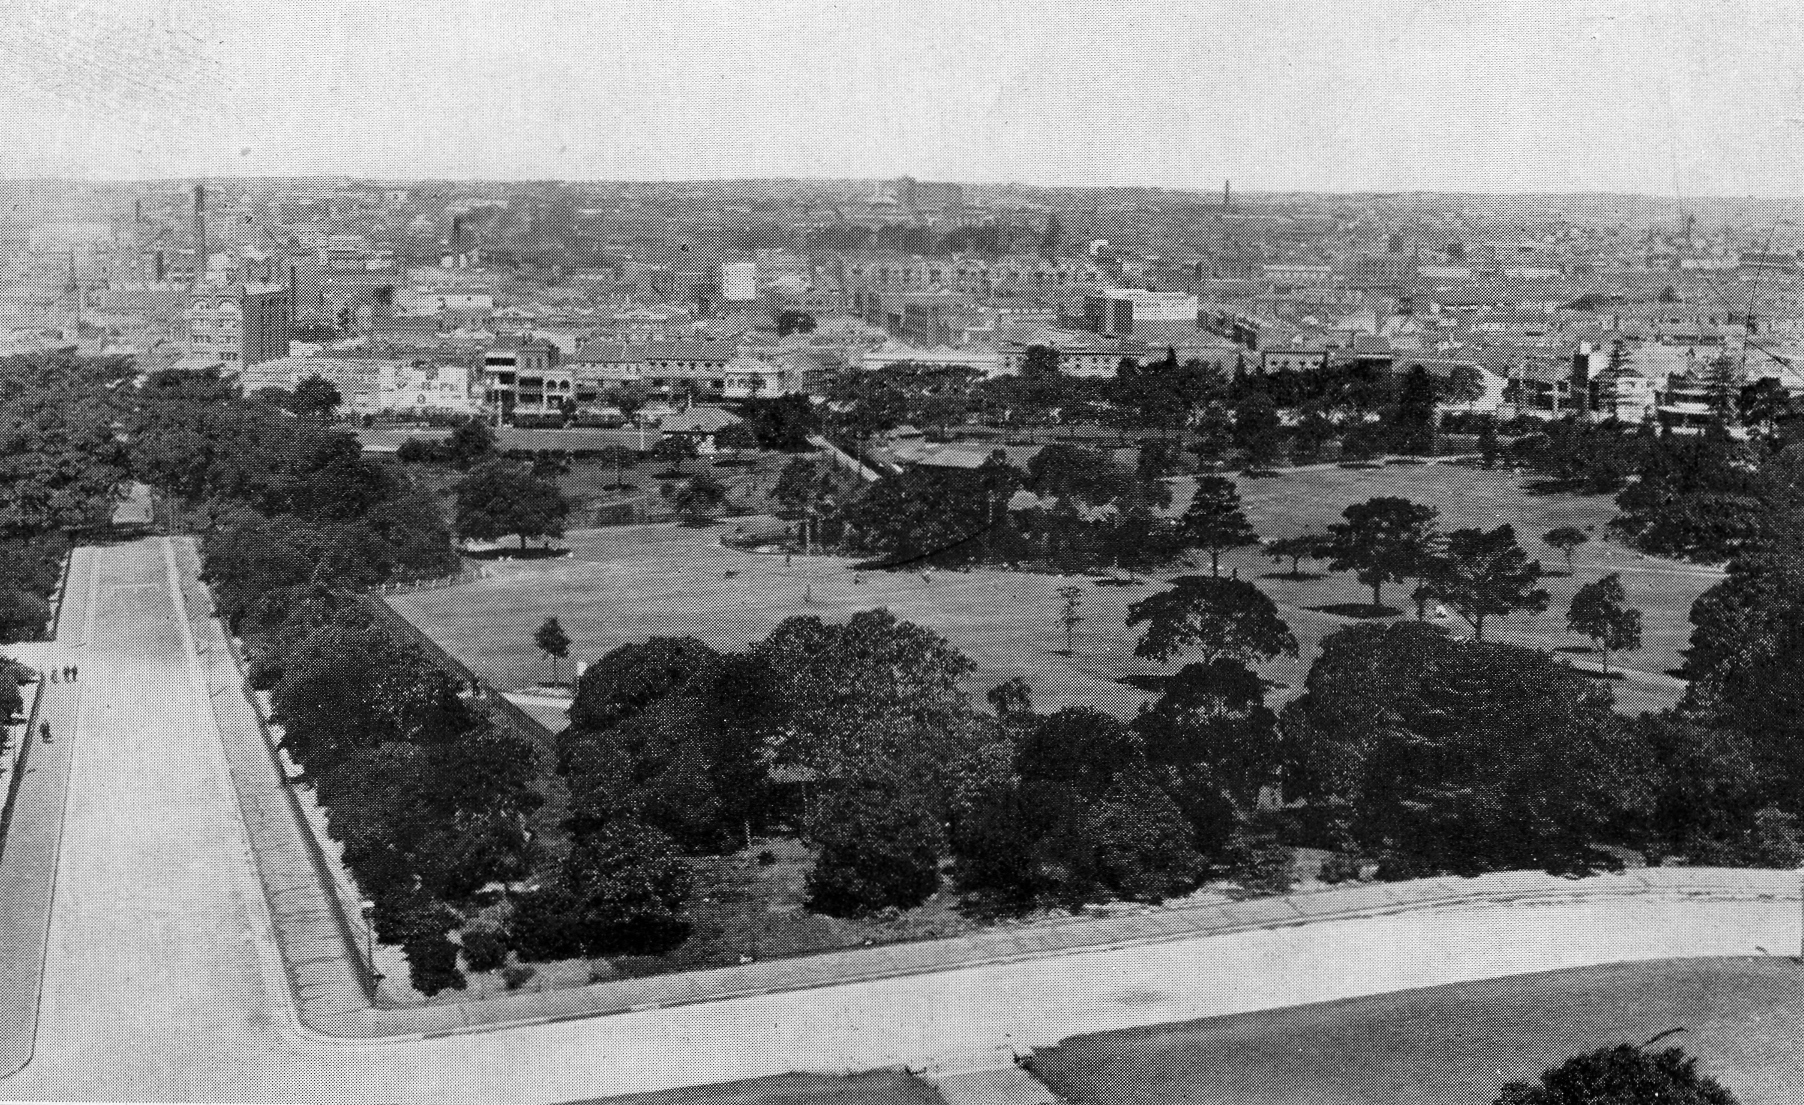 VIEW OF GROUNDS FROM MAIN BUILDING SOUTH WEST